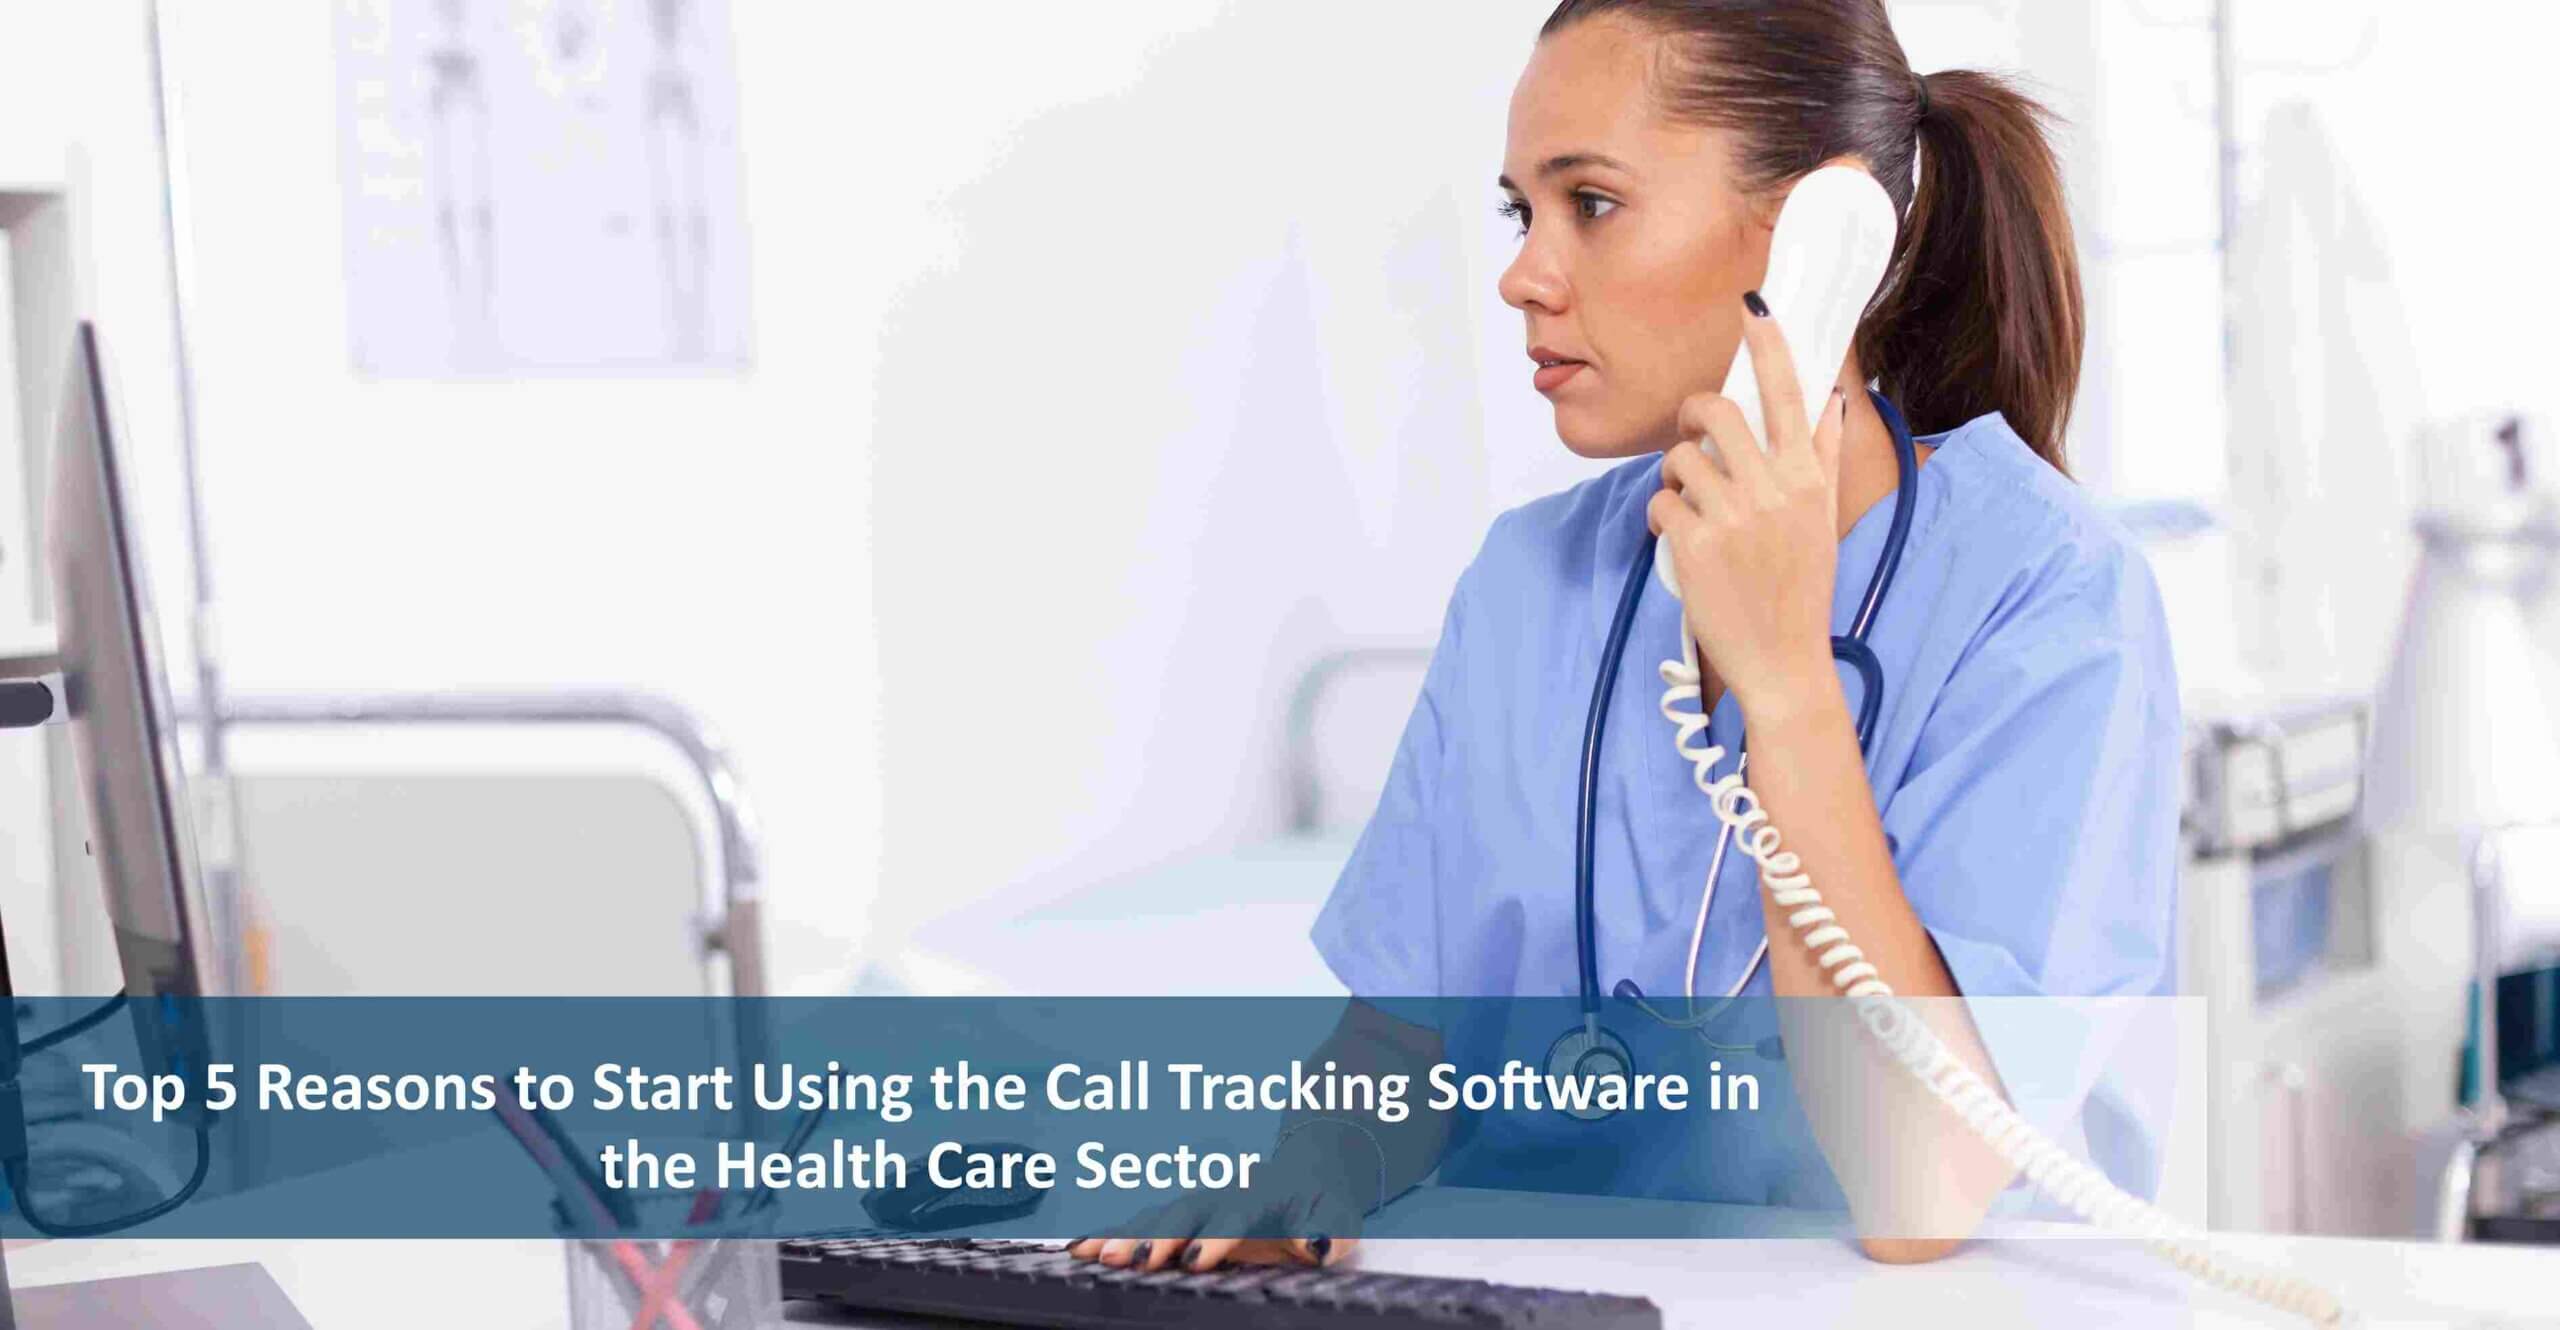 Top 5 Reasons to Start Using the Call Tracking Software in the Health Care Sector